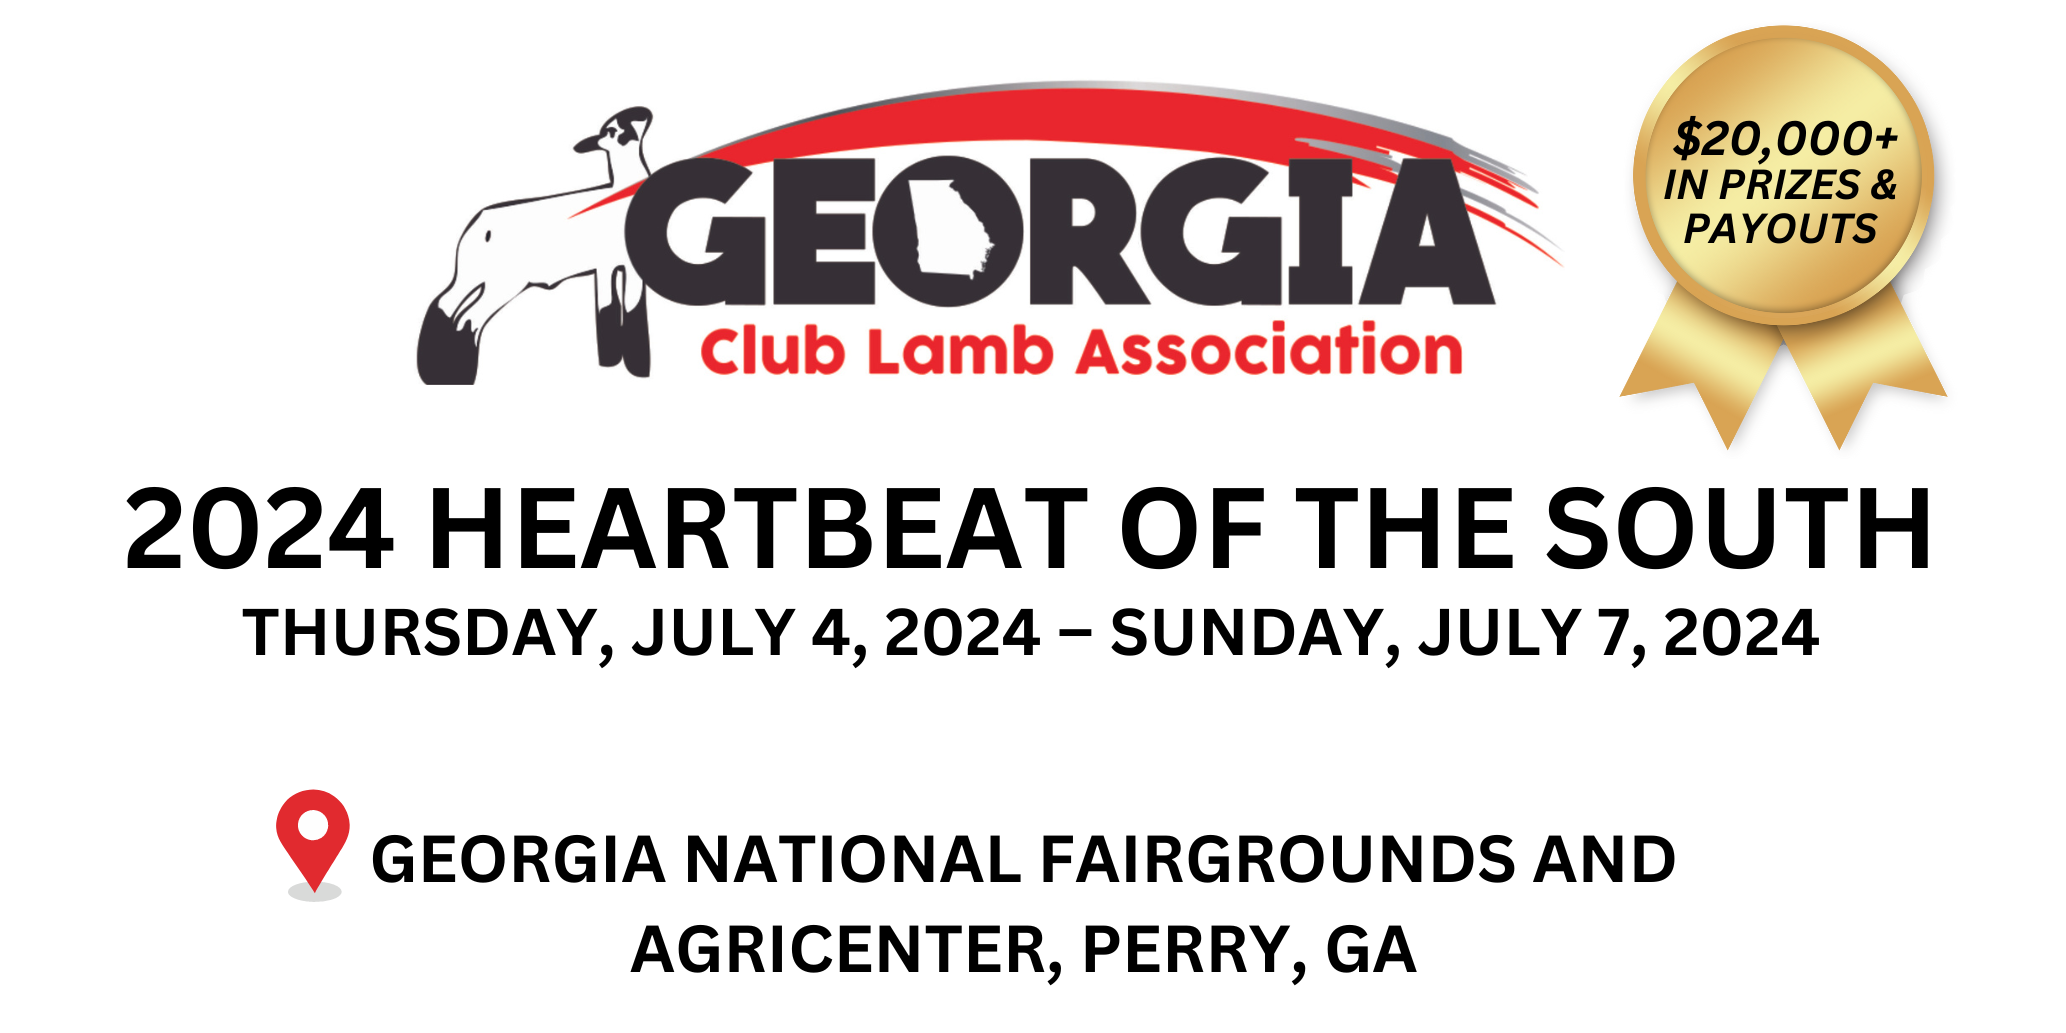 Image for Georgia Club Lamb Association 2024 Heartbeat of the South